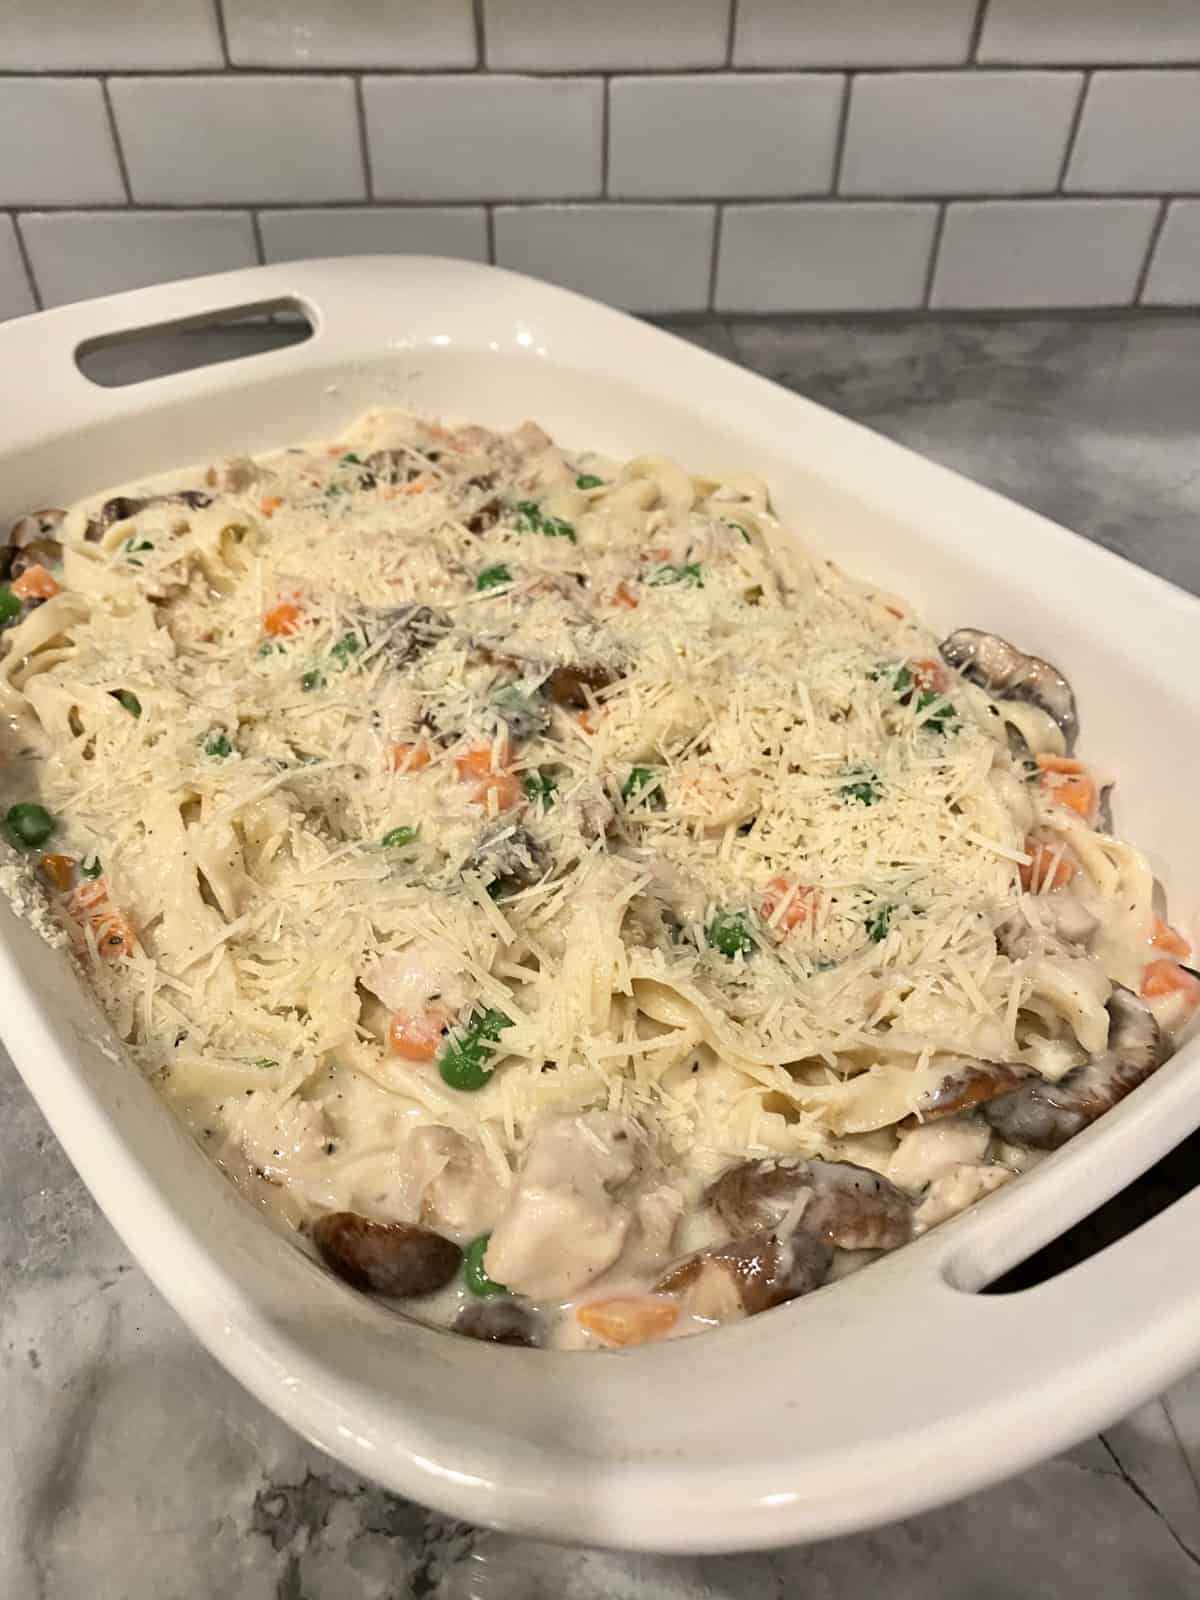 A casserole dish filled with creamy pasta, mushrooms, and turkey topped with cheese.